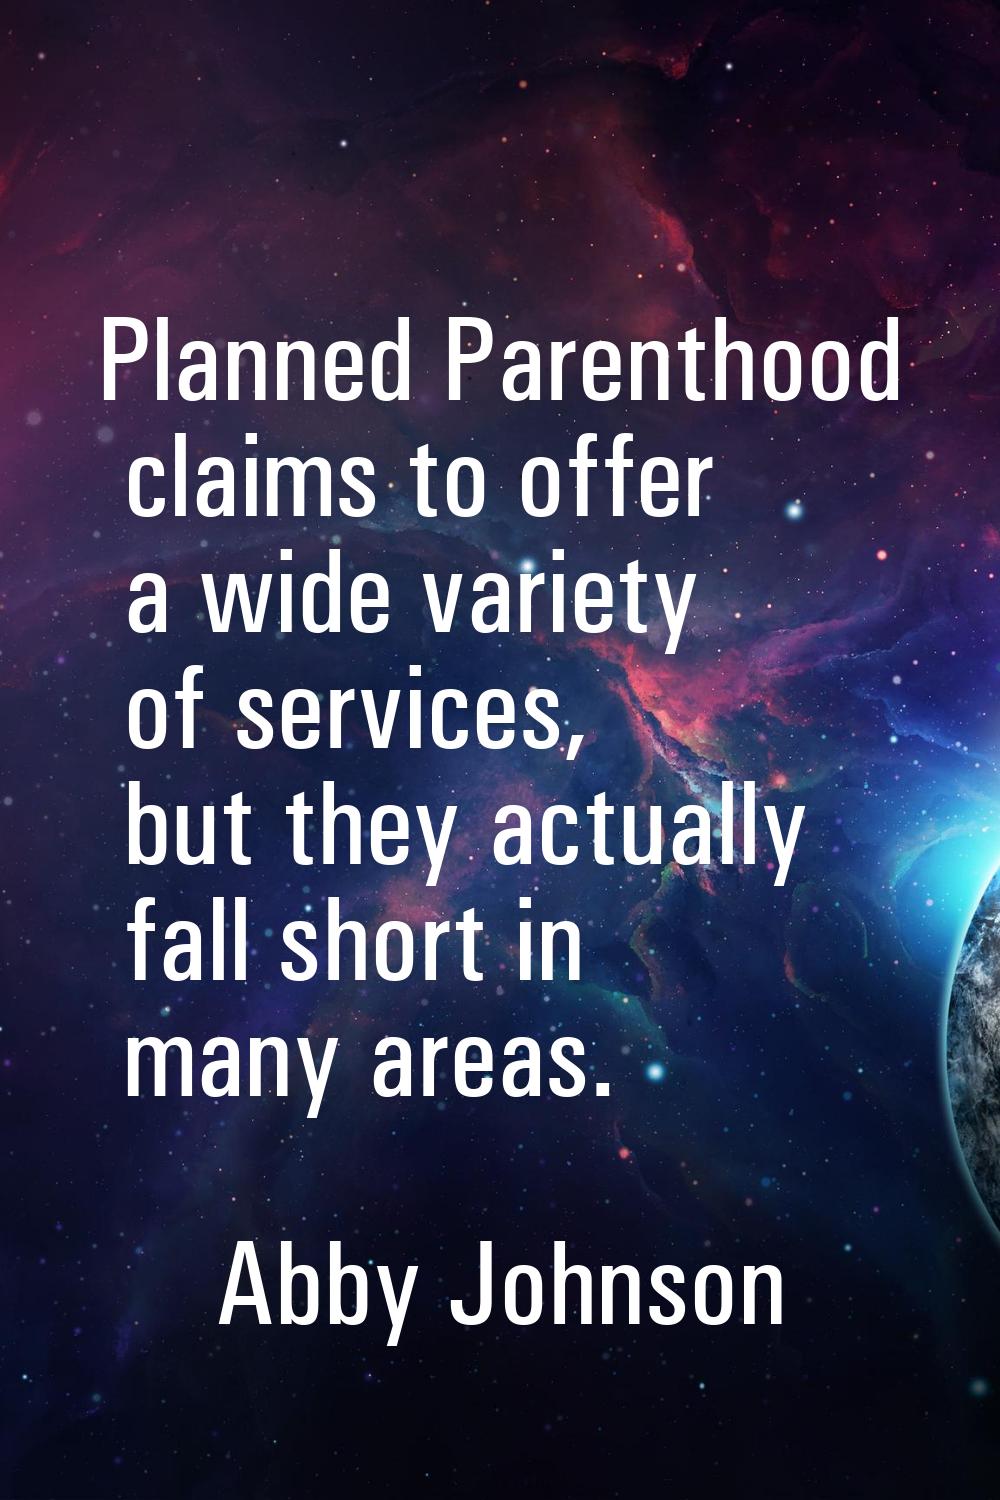 Planned Parenthood claims to offer a wide variety of services, but they actually fall short in many